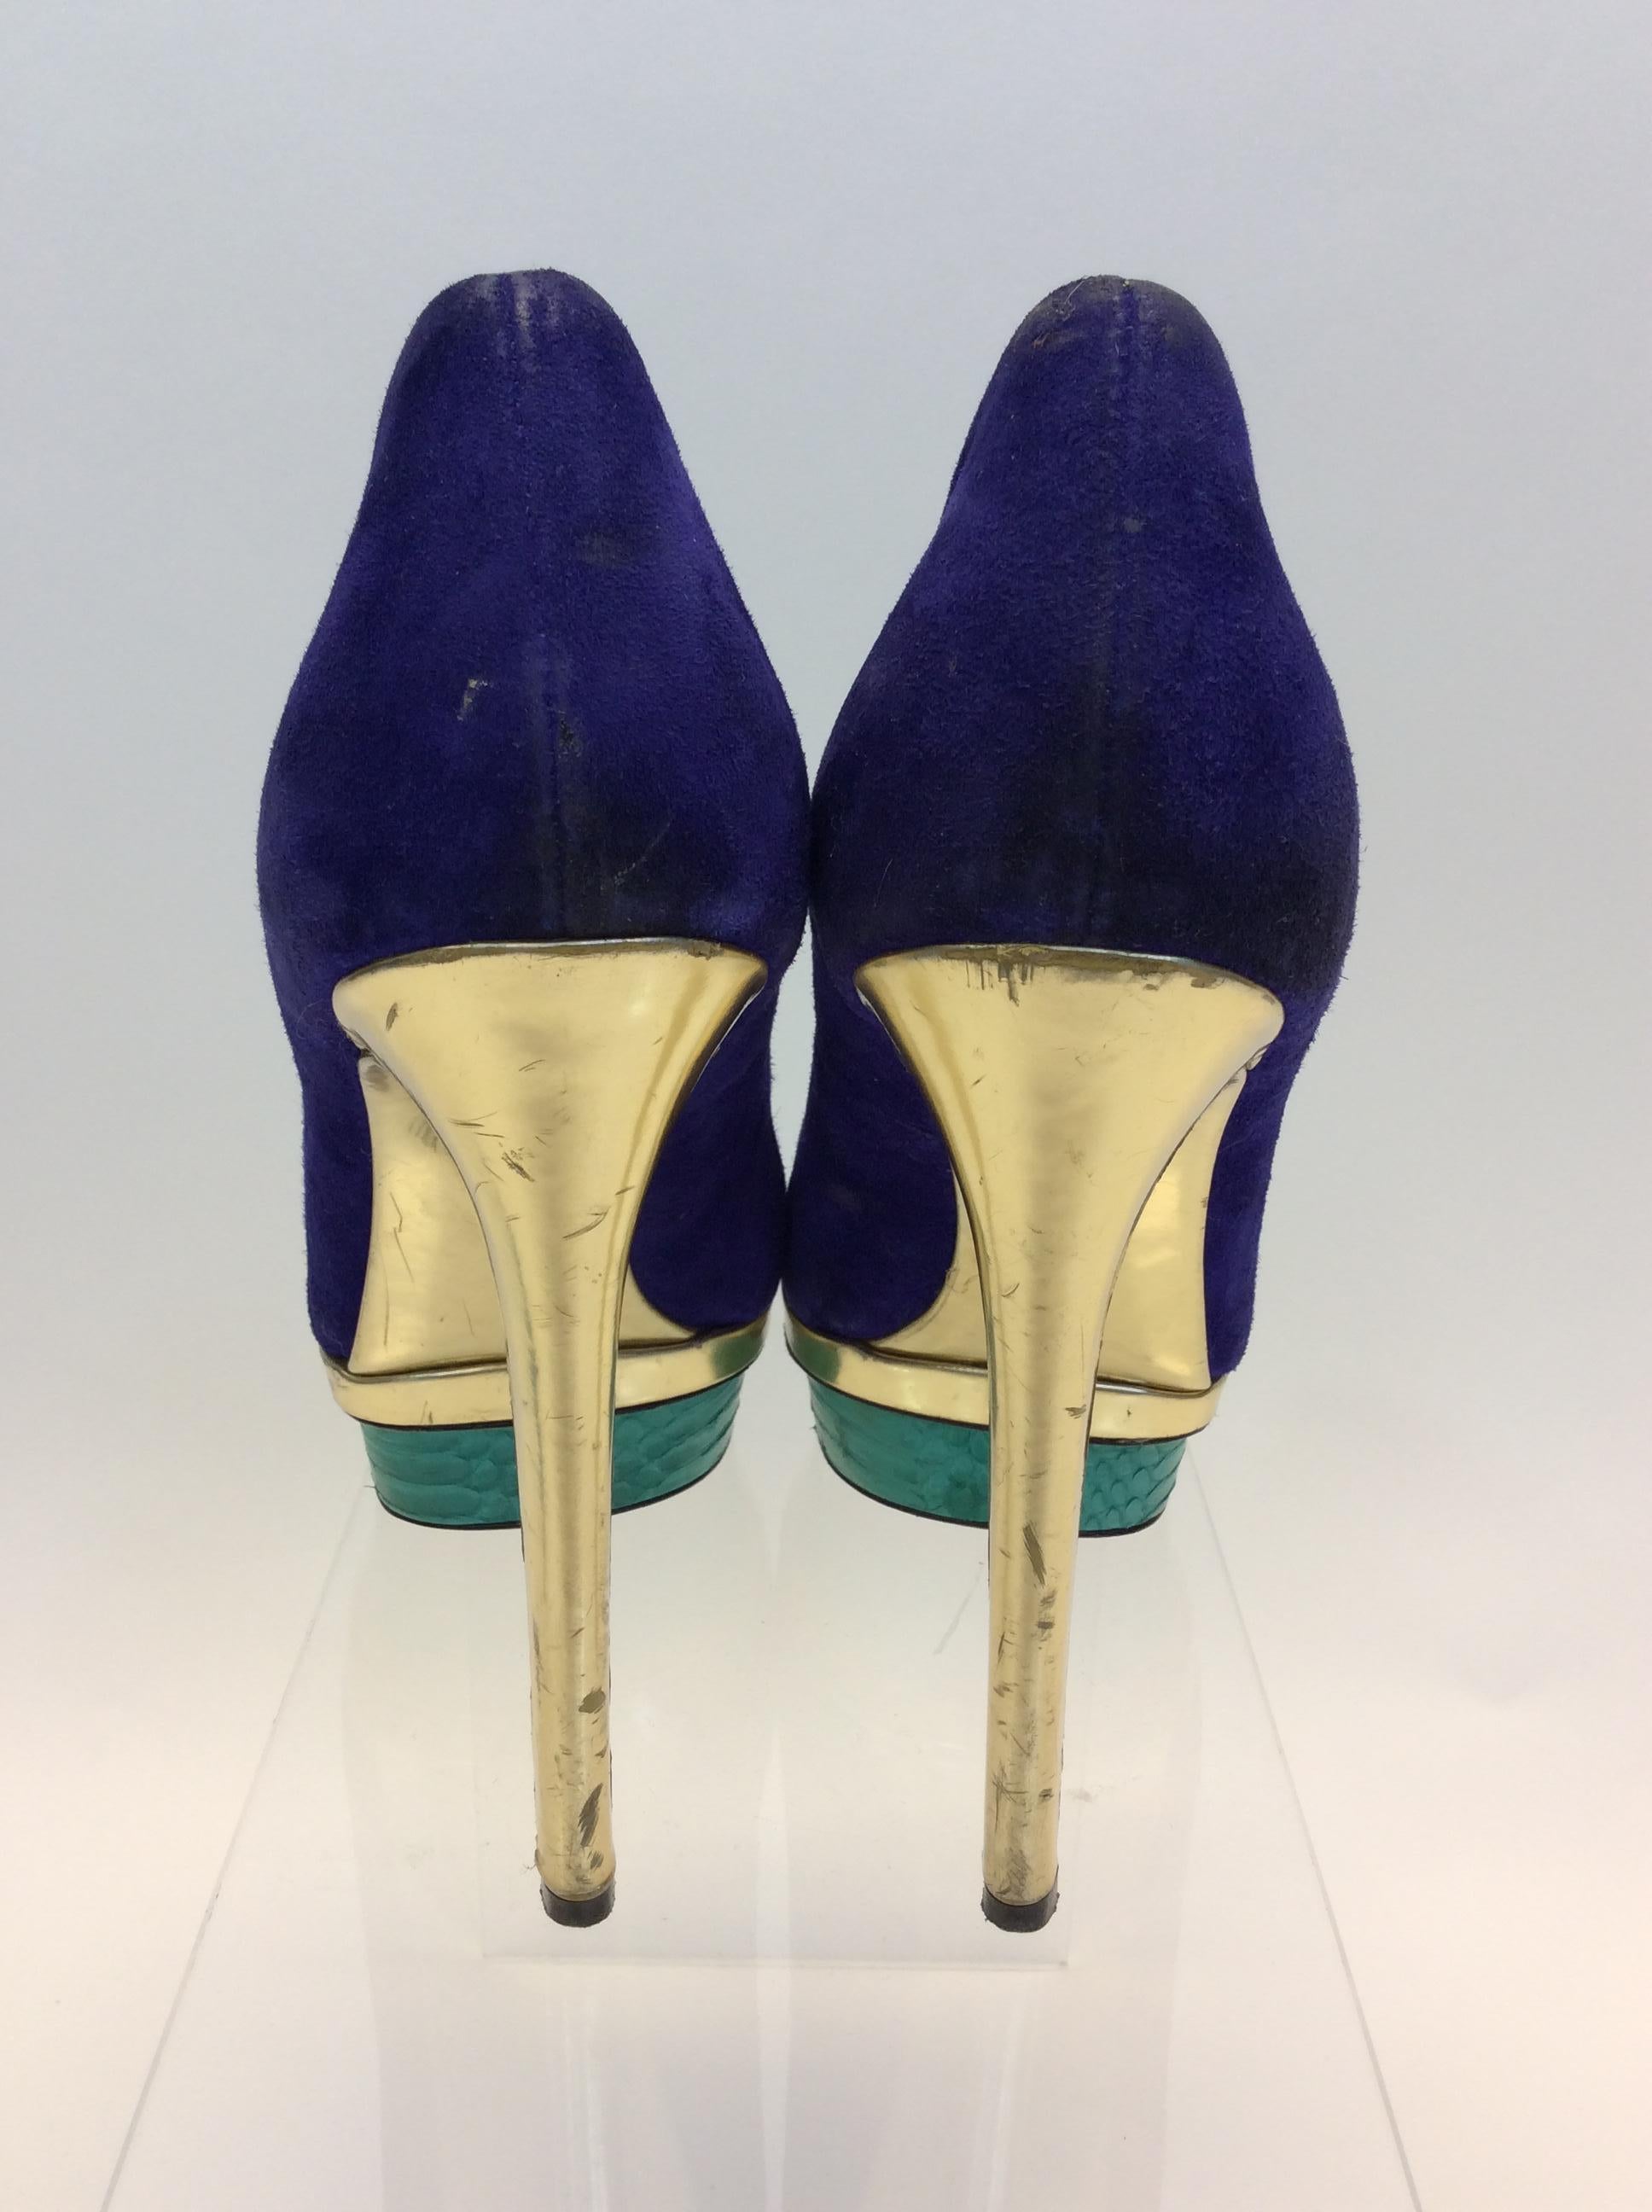 Purple Brian Atwood Multi-Colored Suede Heels For Sale